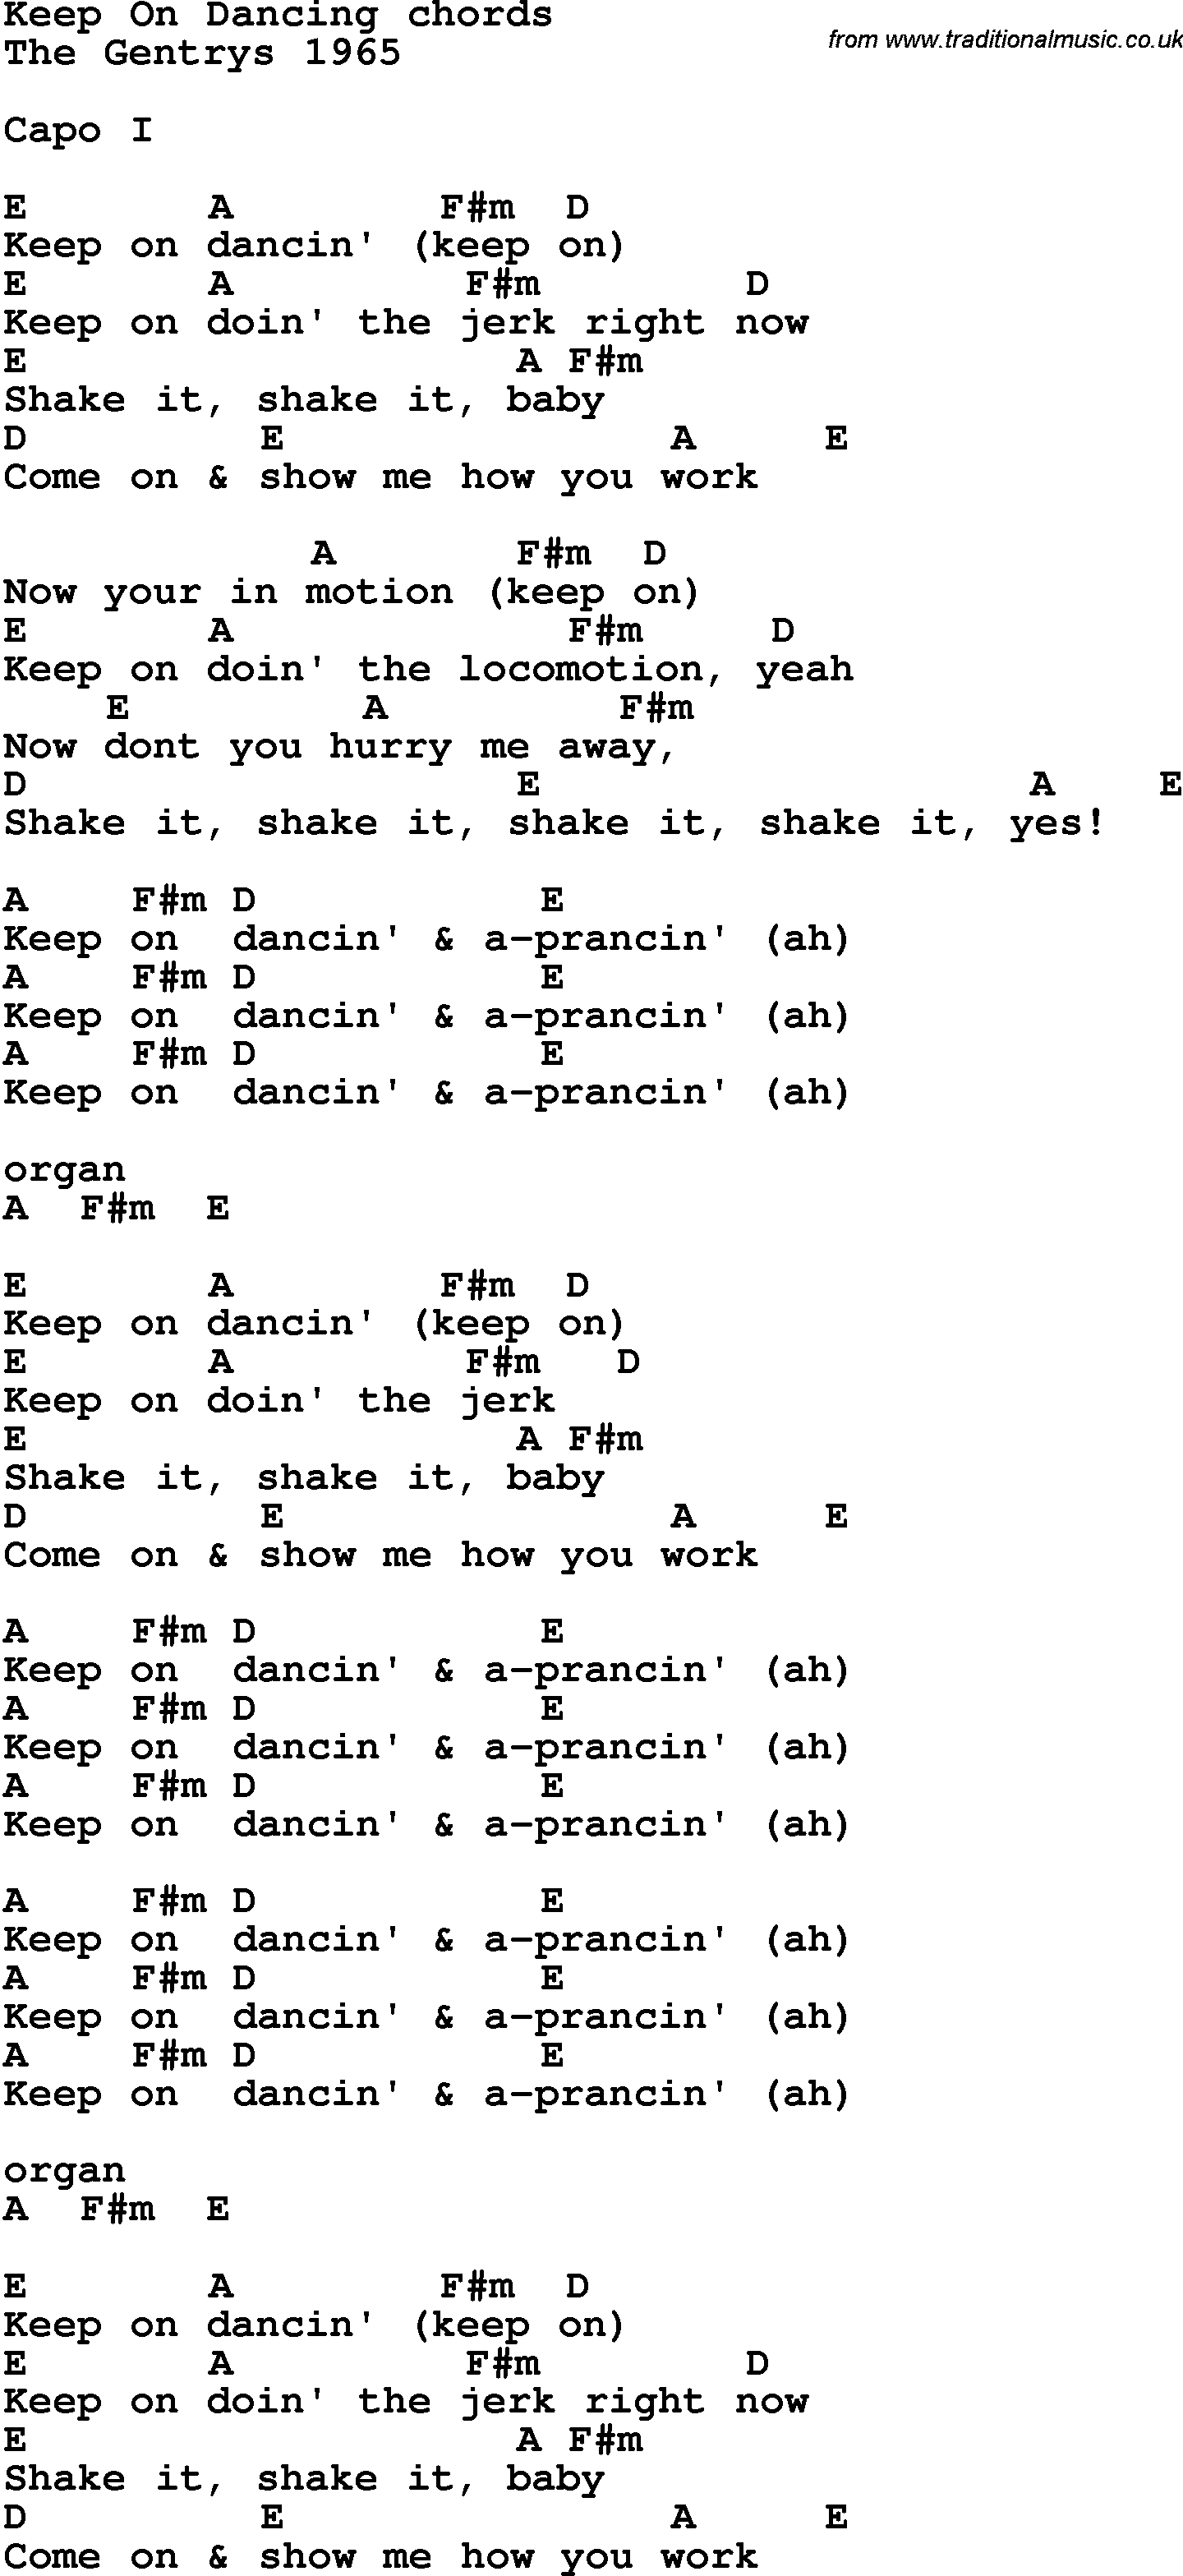 Song Lyrics with guitar chords for Keep On Dancing